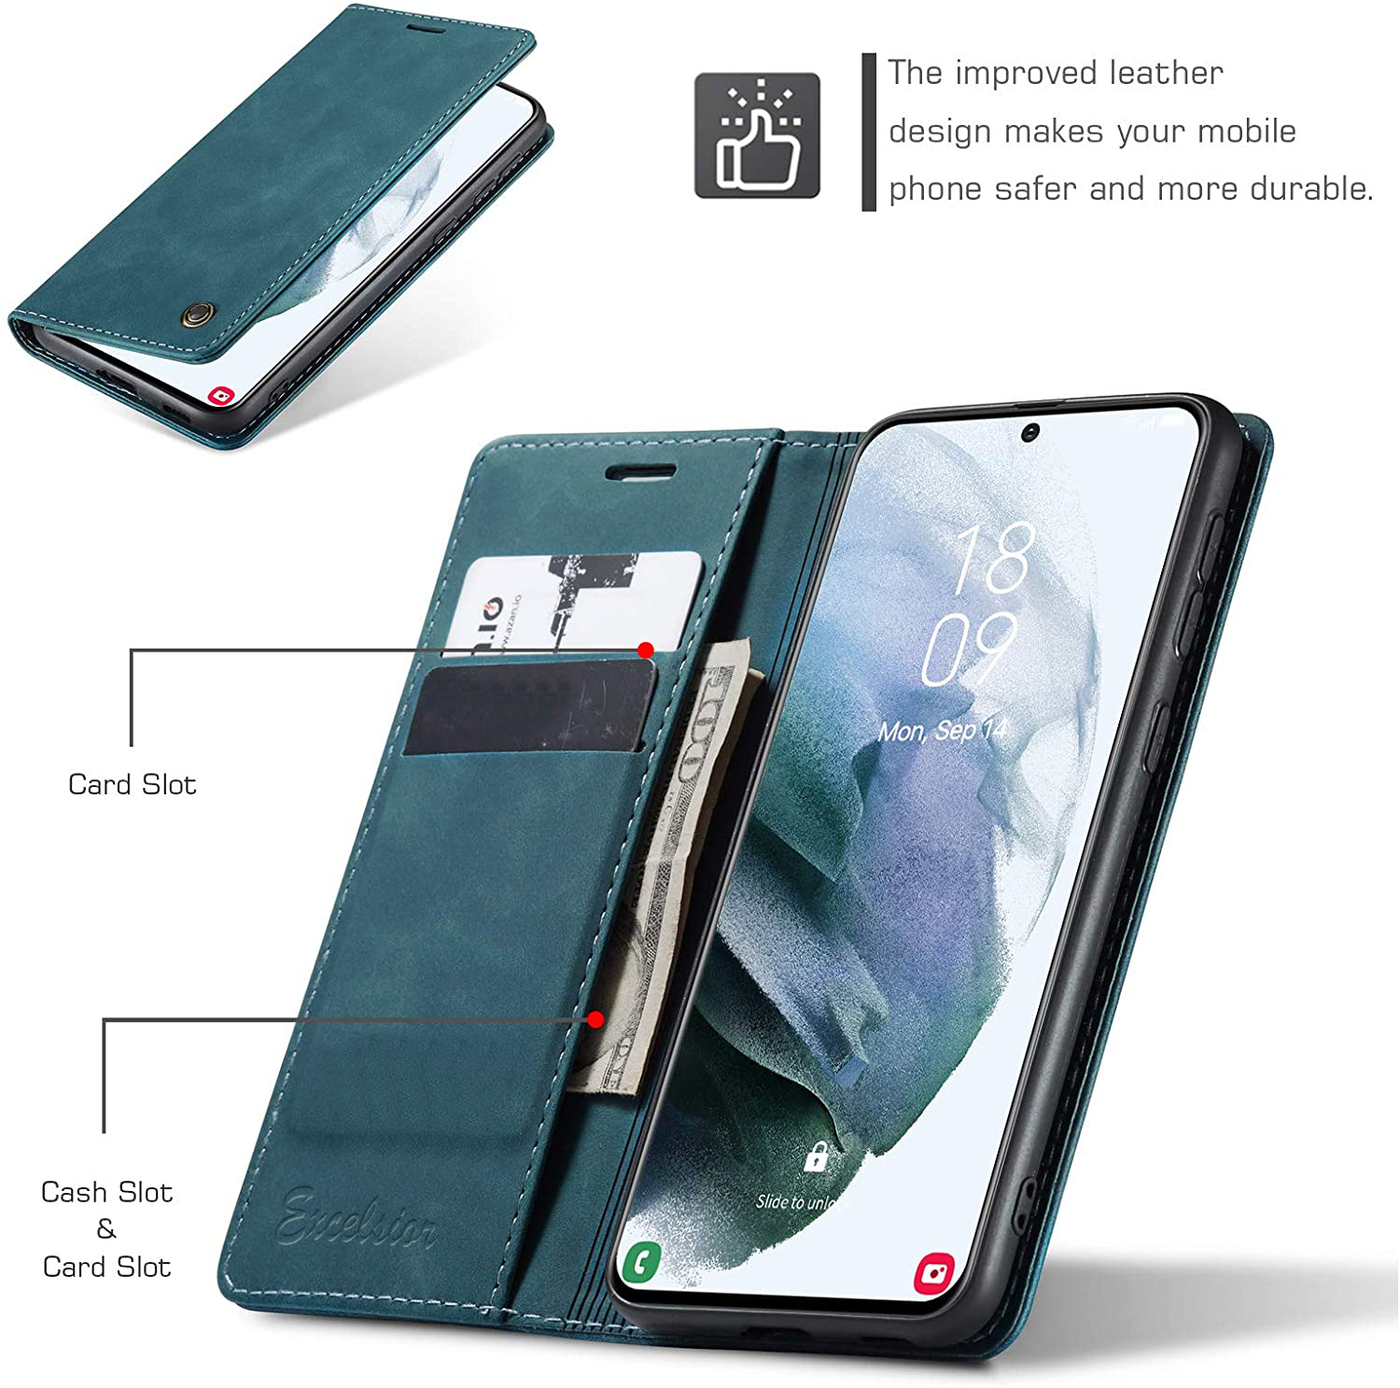 Samsung Galaxy S21 Plus 5G Leather Wallet flip case cover with card slots by Excelsior 